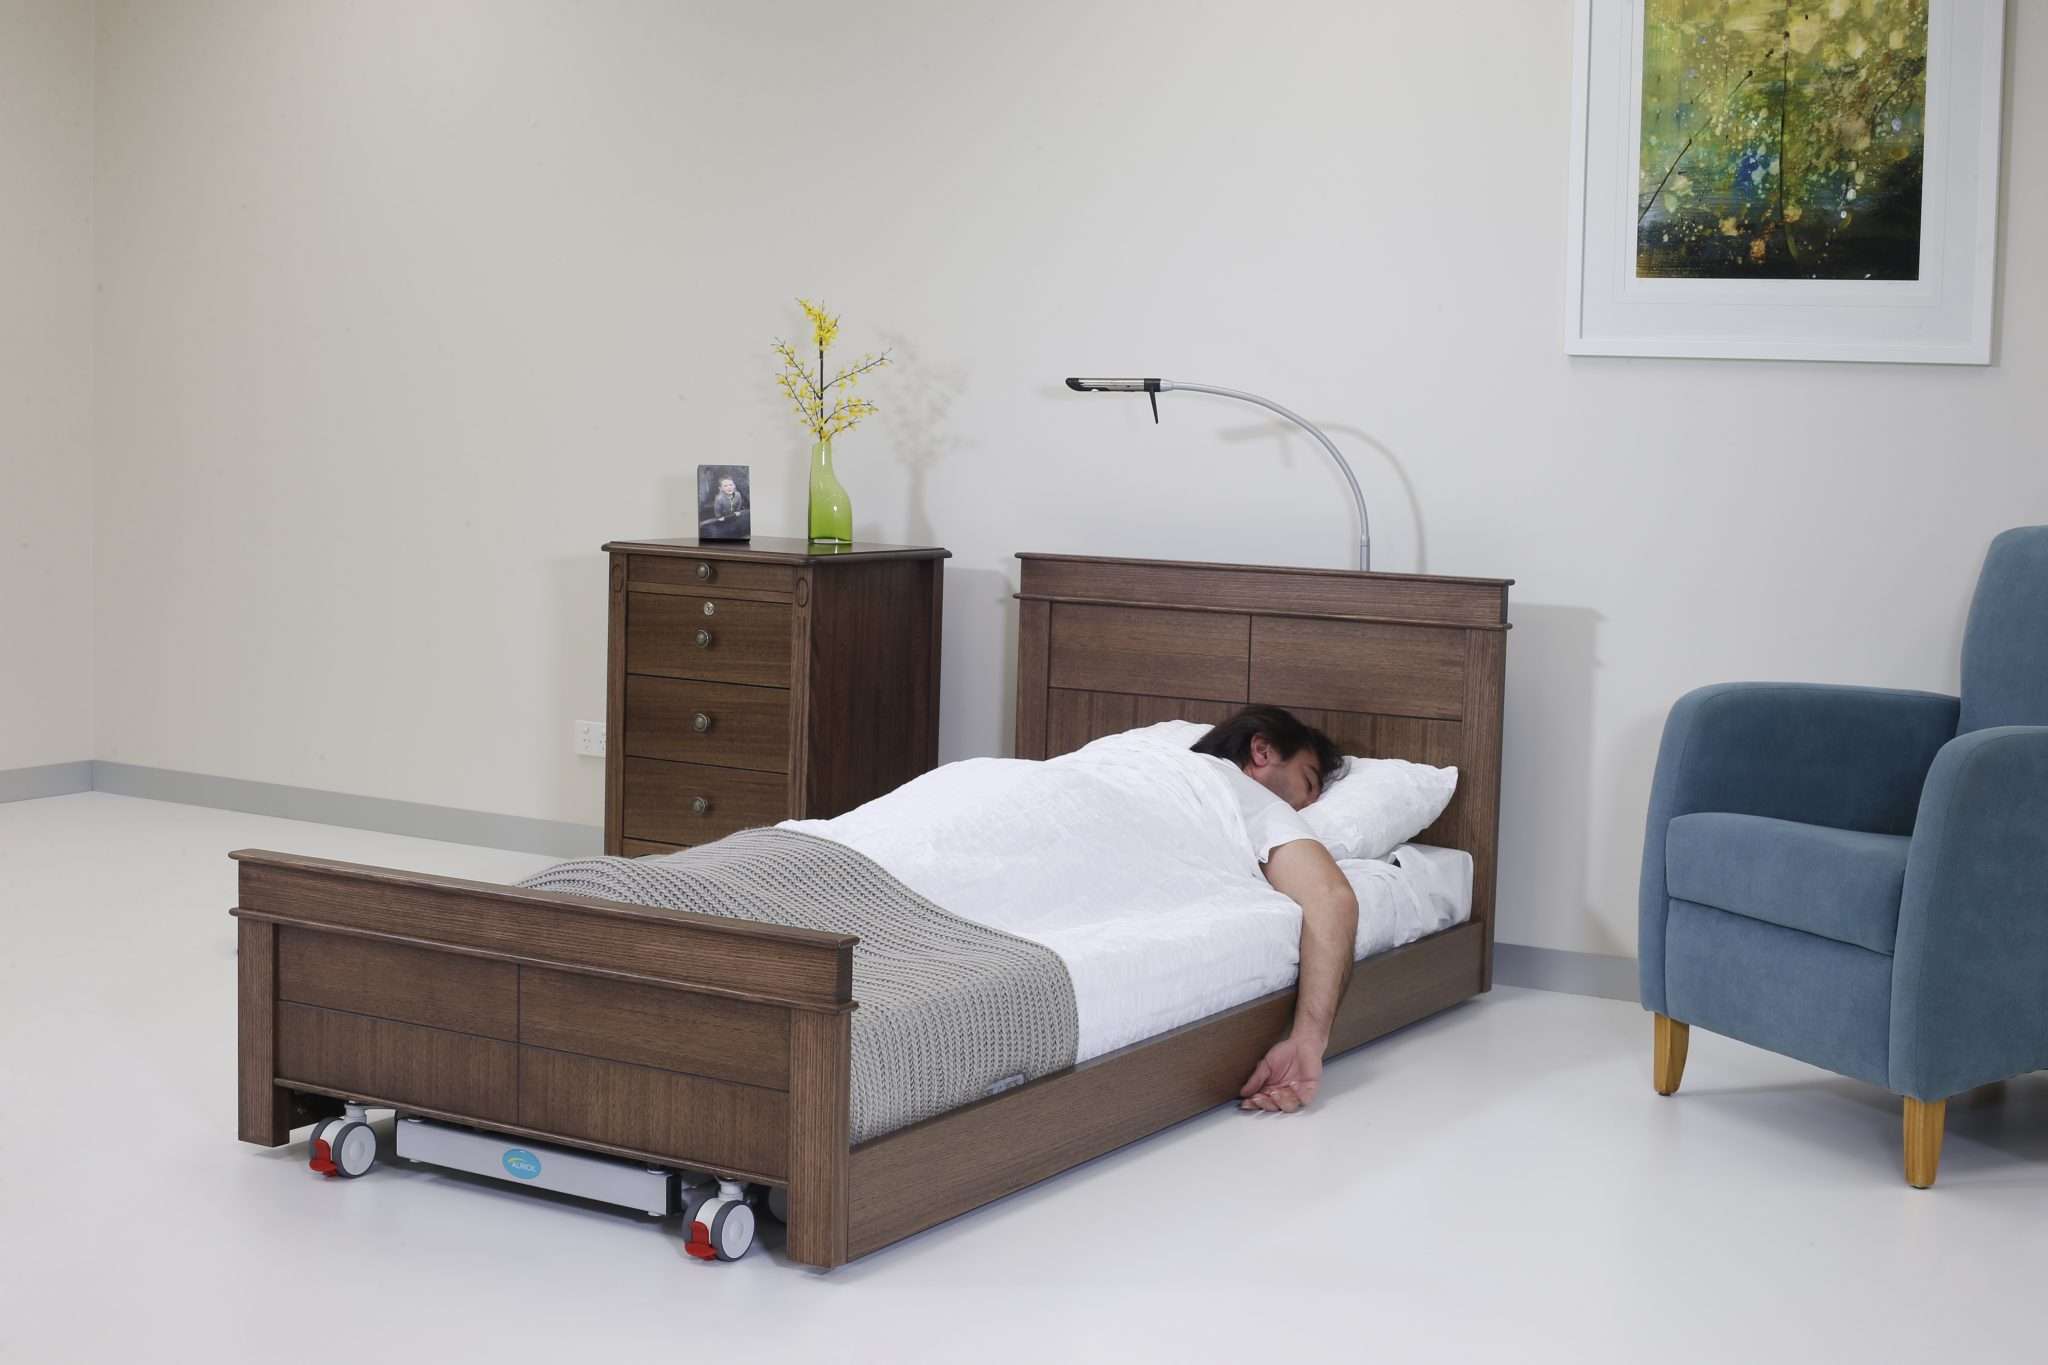 A man asleep in an ultralow bed that helps to prevent falling out of bed